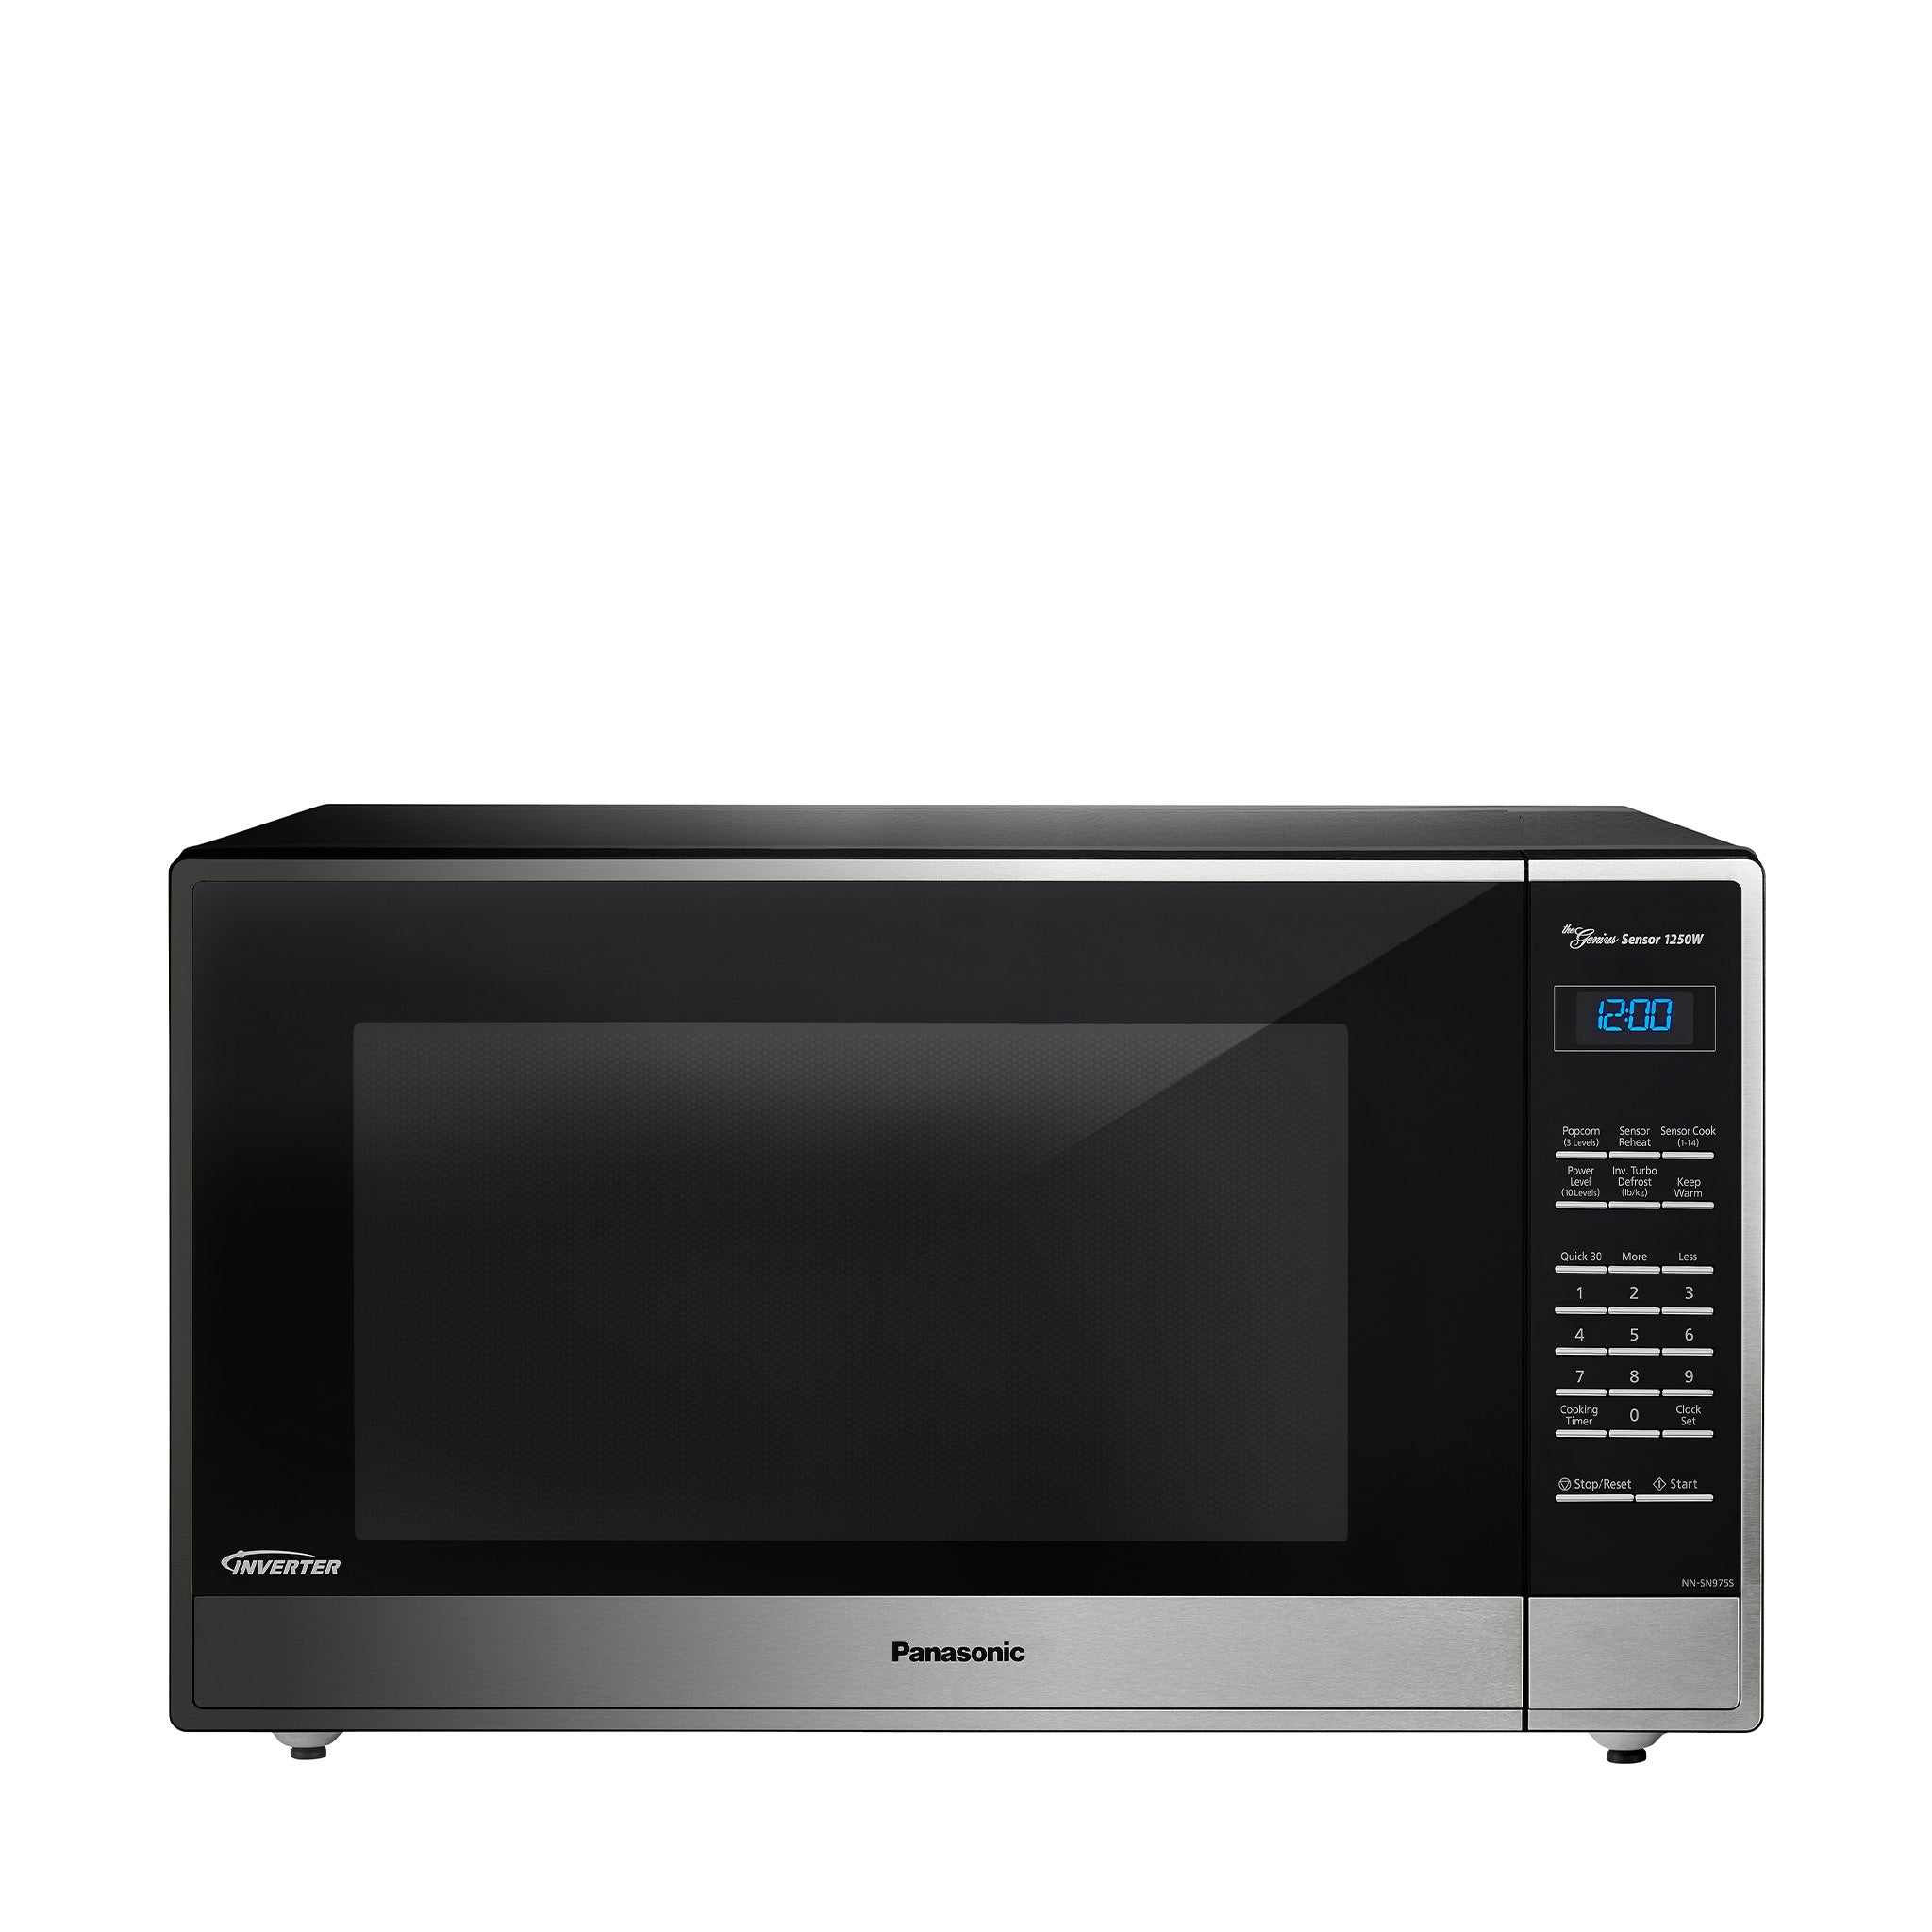 Panasonic Microwave Oven with Inverter Technology, 2.2 cu. ft 